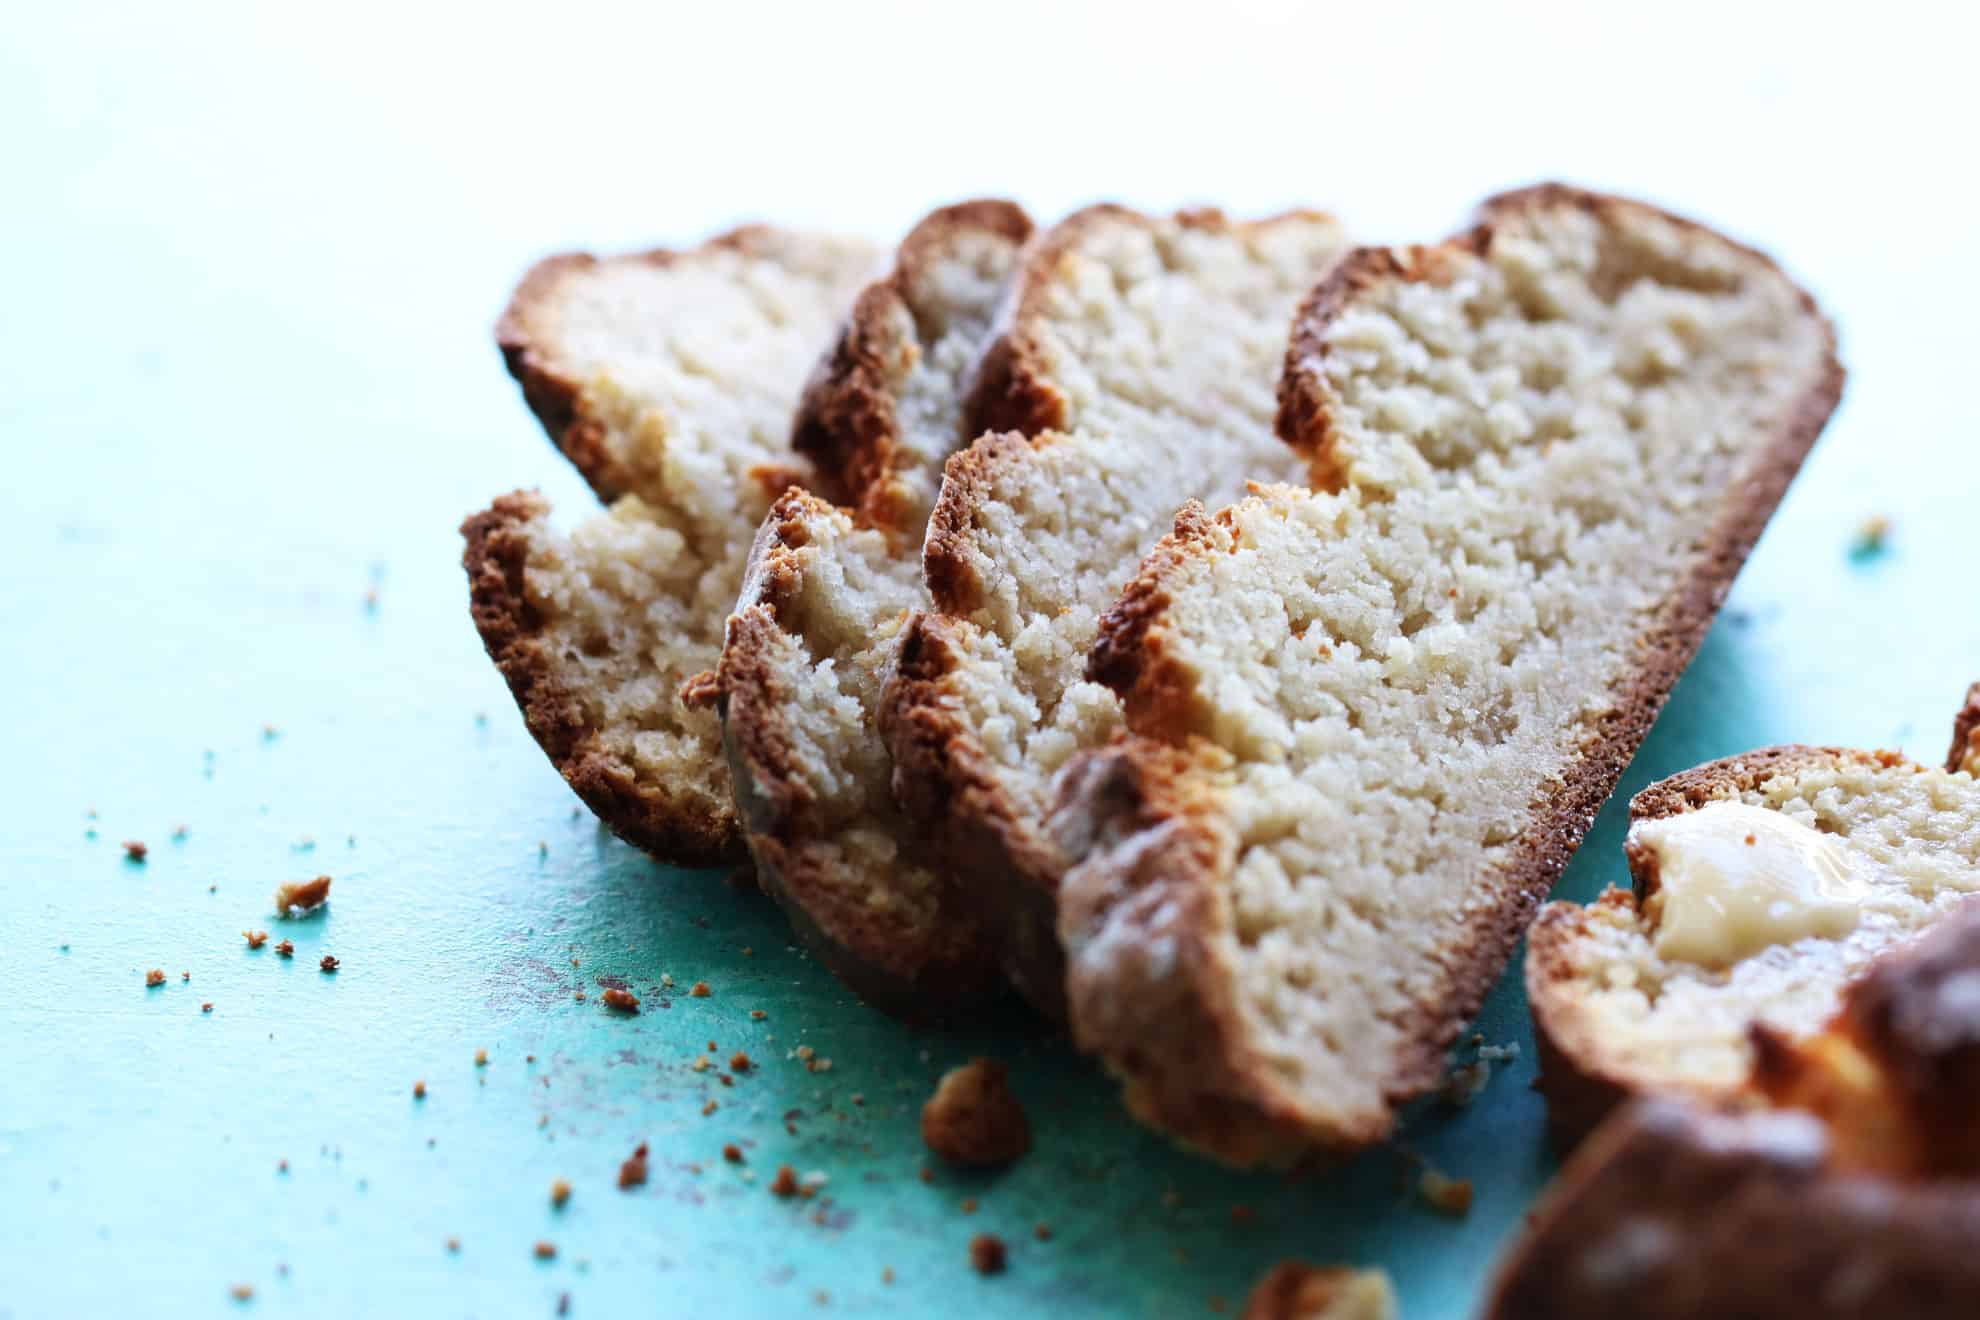 This is a side view of soda bread sliced and leaning against each other. The bread lays on a turquoise surface with crumbs around it.